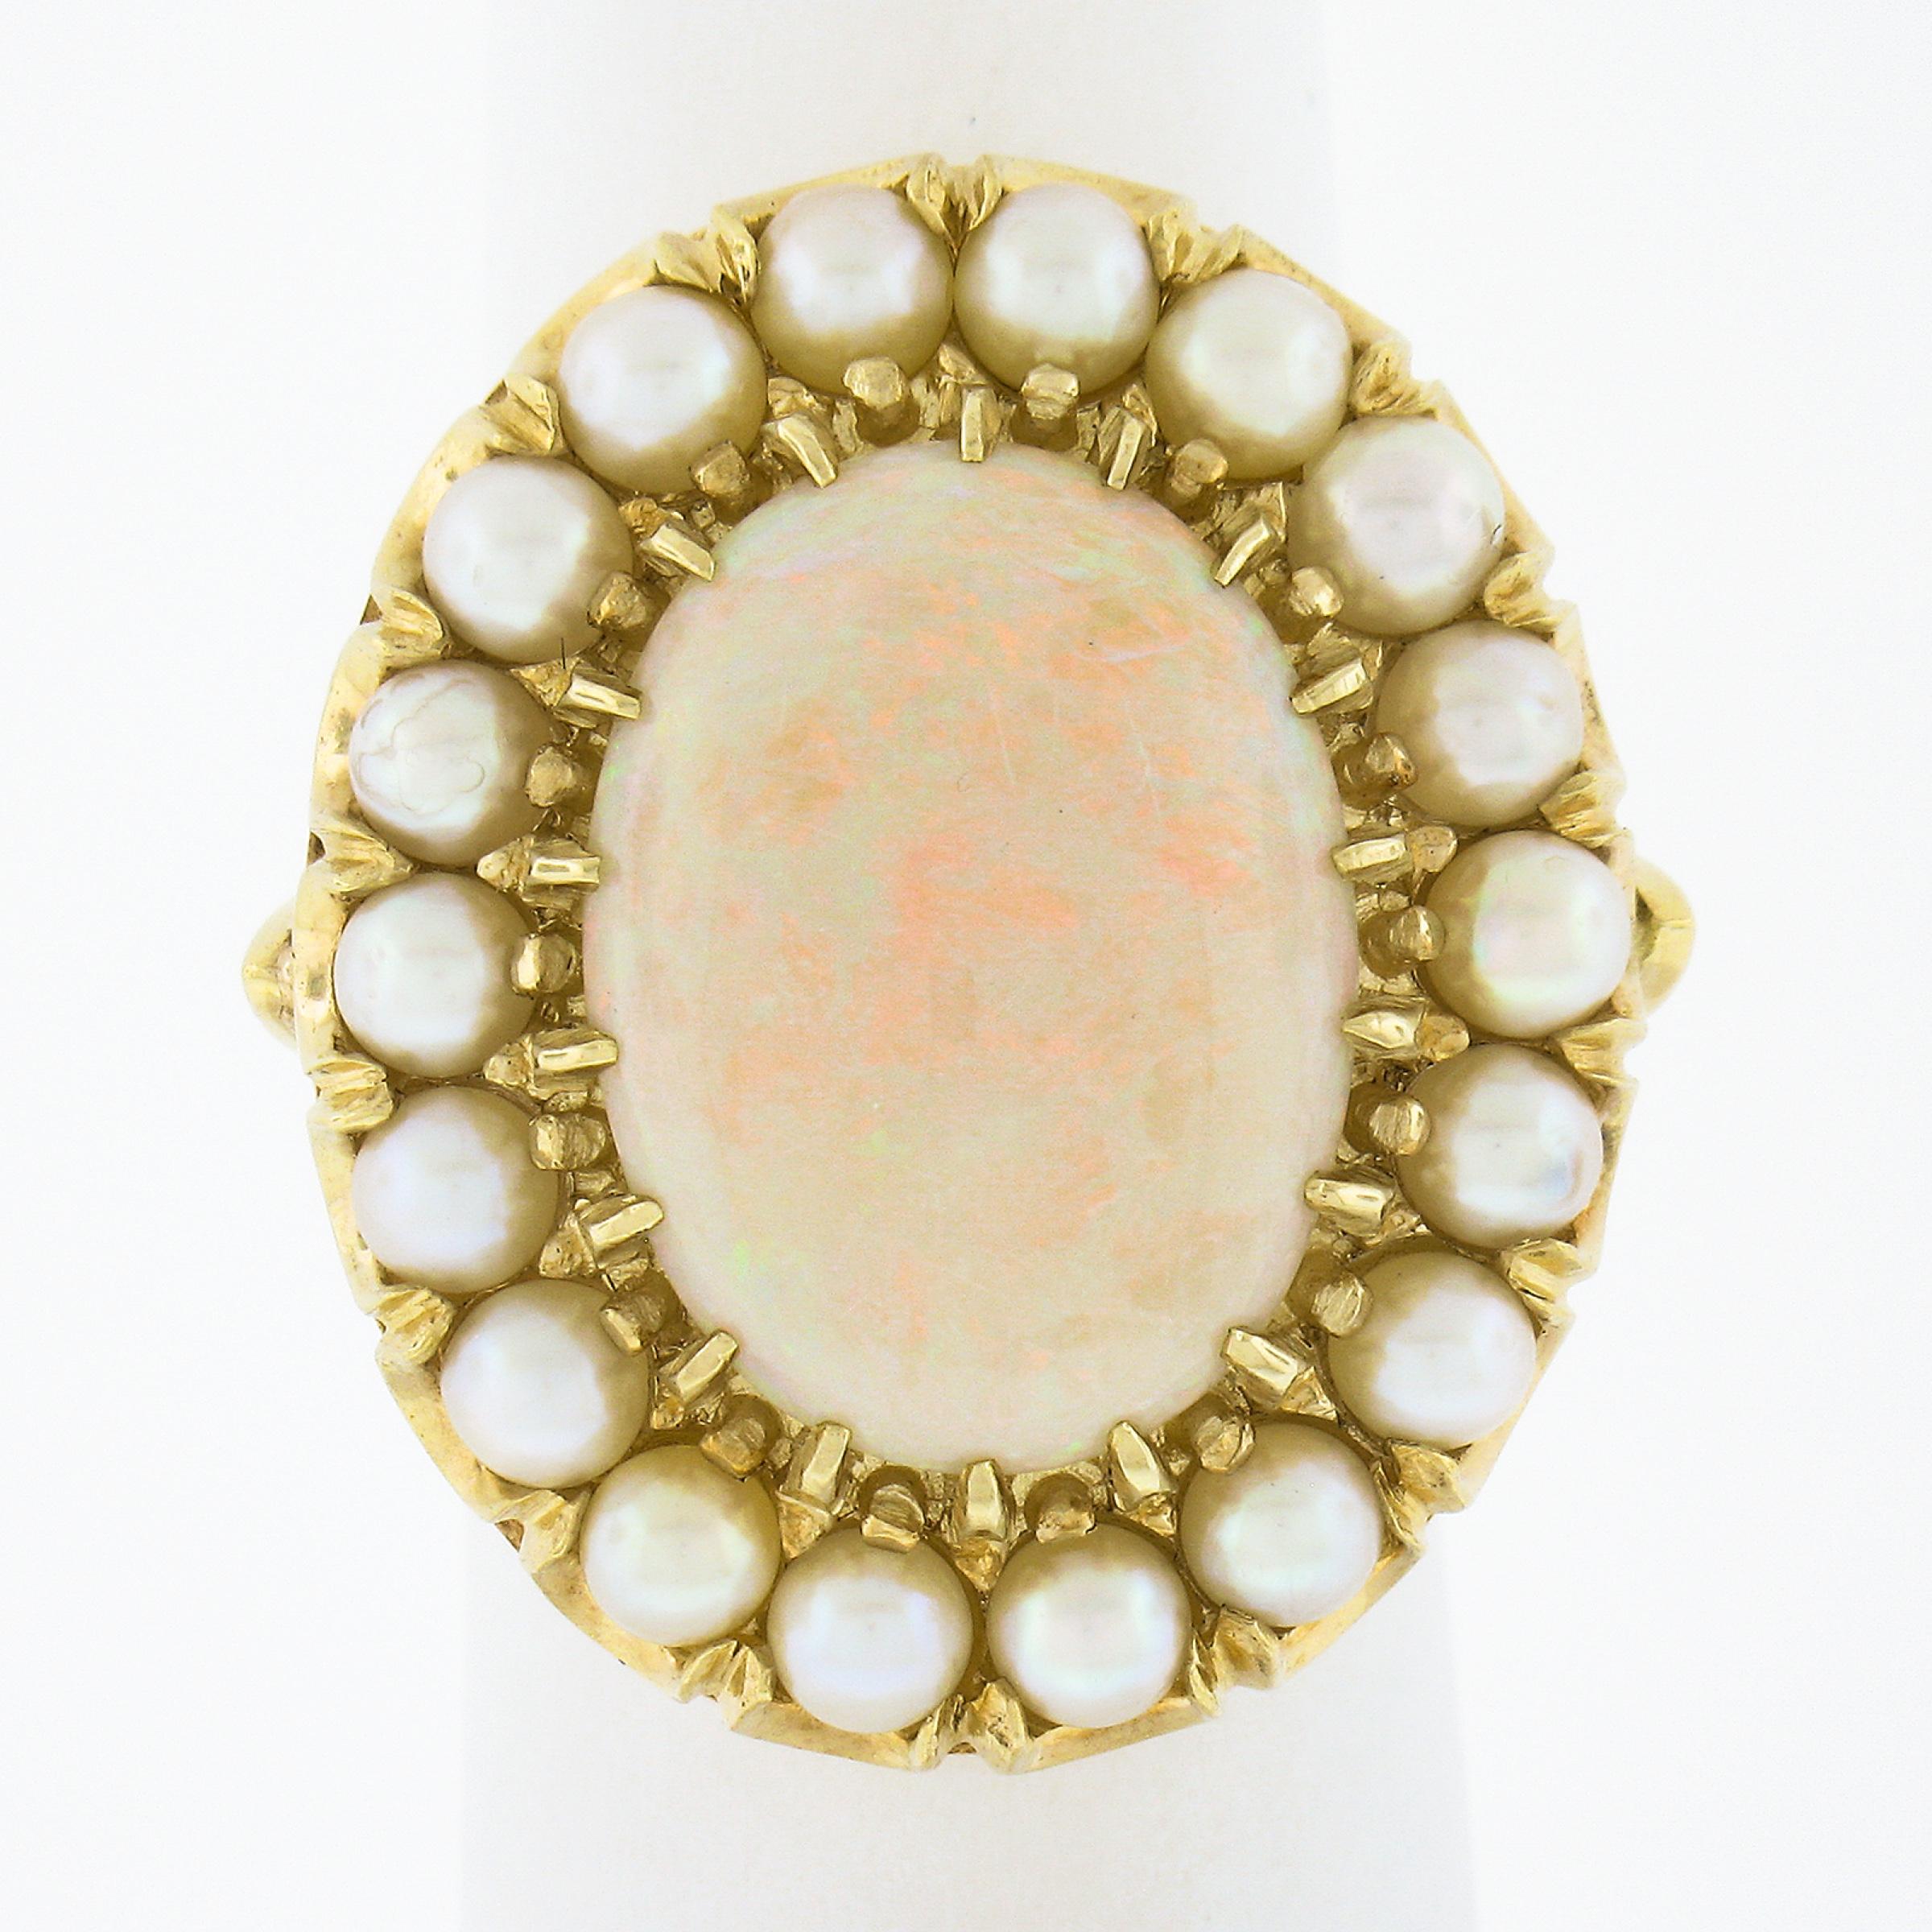 This gorgeous well made vintage ring is crafted in solid 14k yellow gold and features a stunning oval cabochon opal stone having a white base color and displays a light green and orange play throughout. The center stone is surrounded by a halo of 18